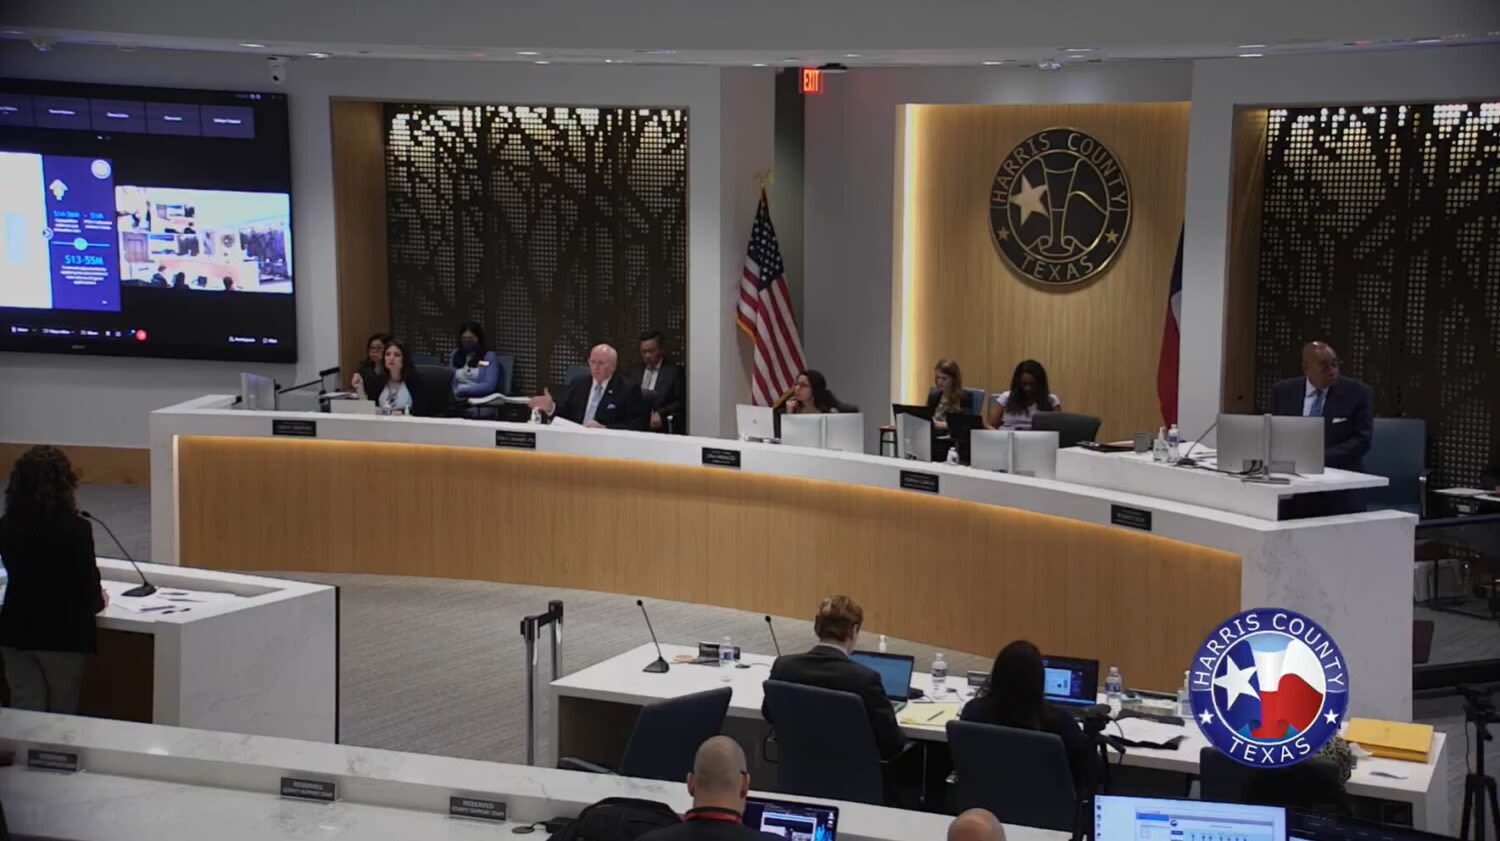 Harris County faces a $129 million deficit in Fiscal Year 2025, budget director warns | Houston Public Media